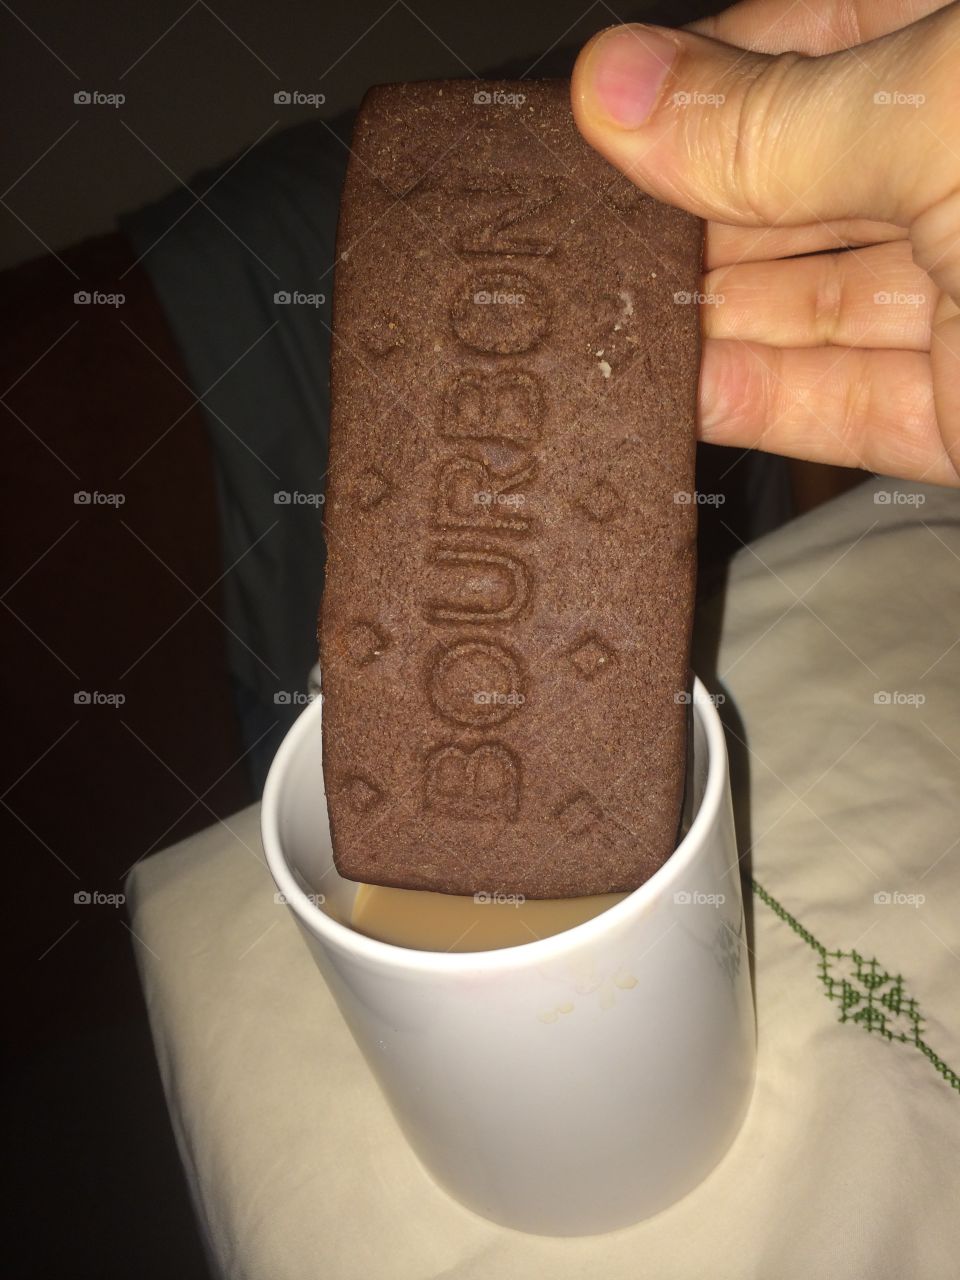 Outsize biscuit. Larger than normal Bourbon biscuit 